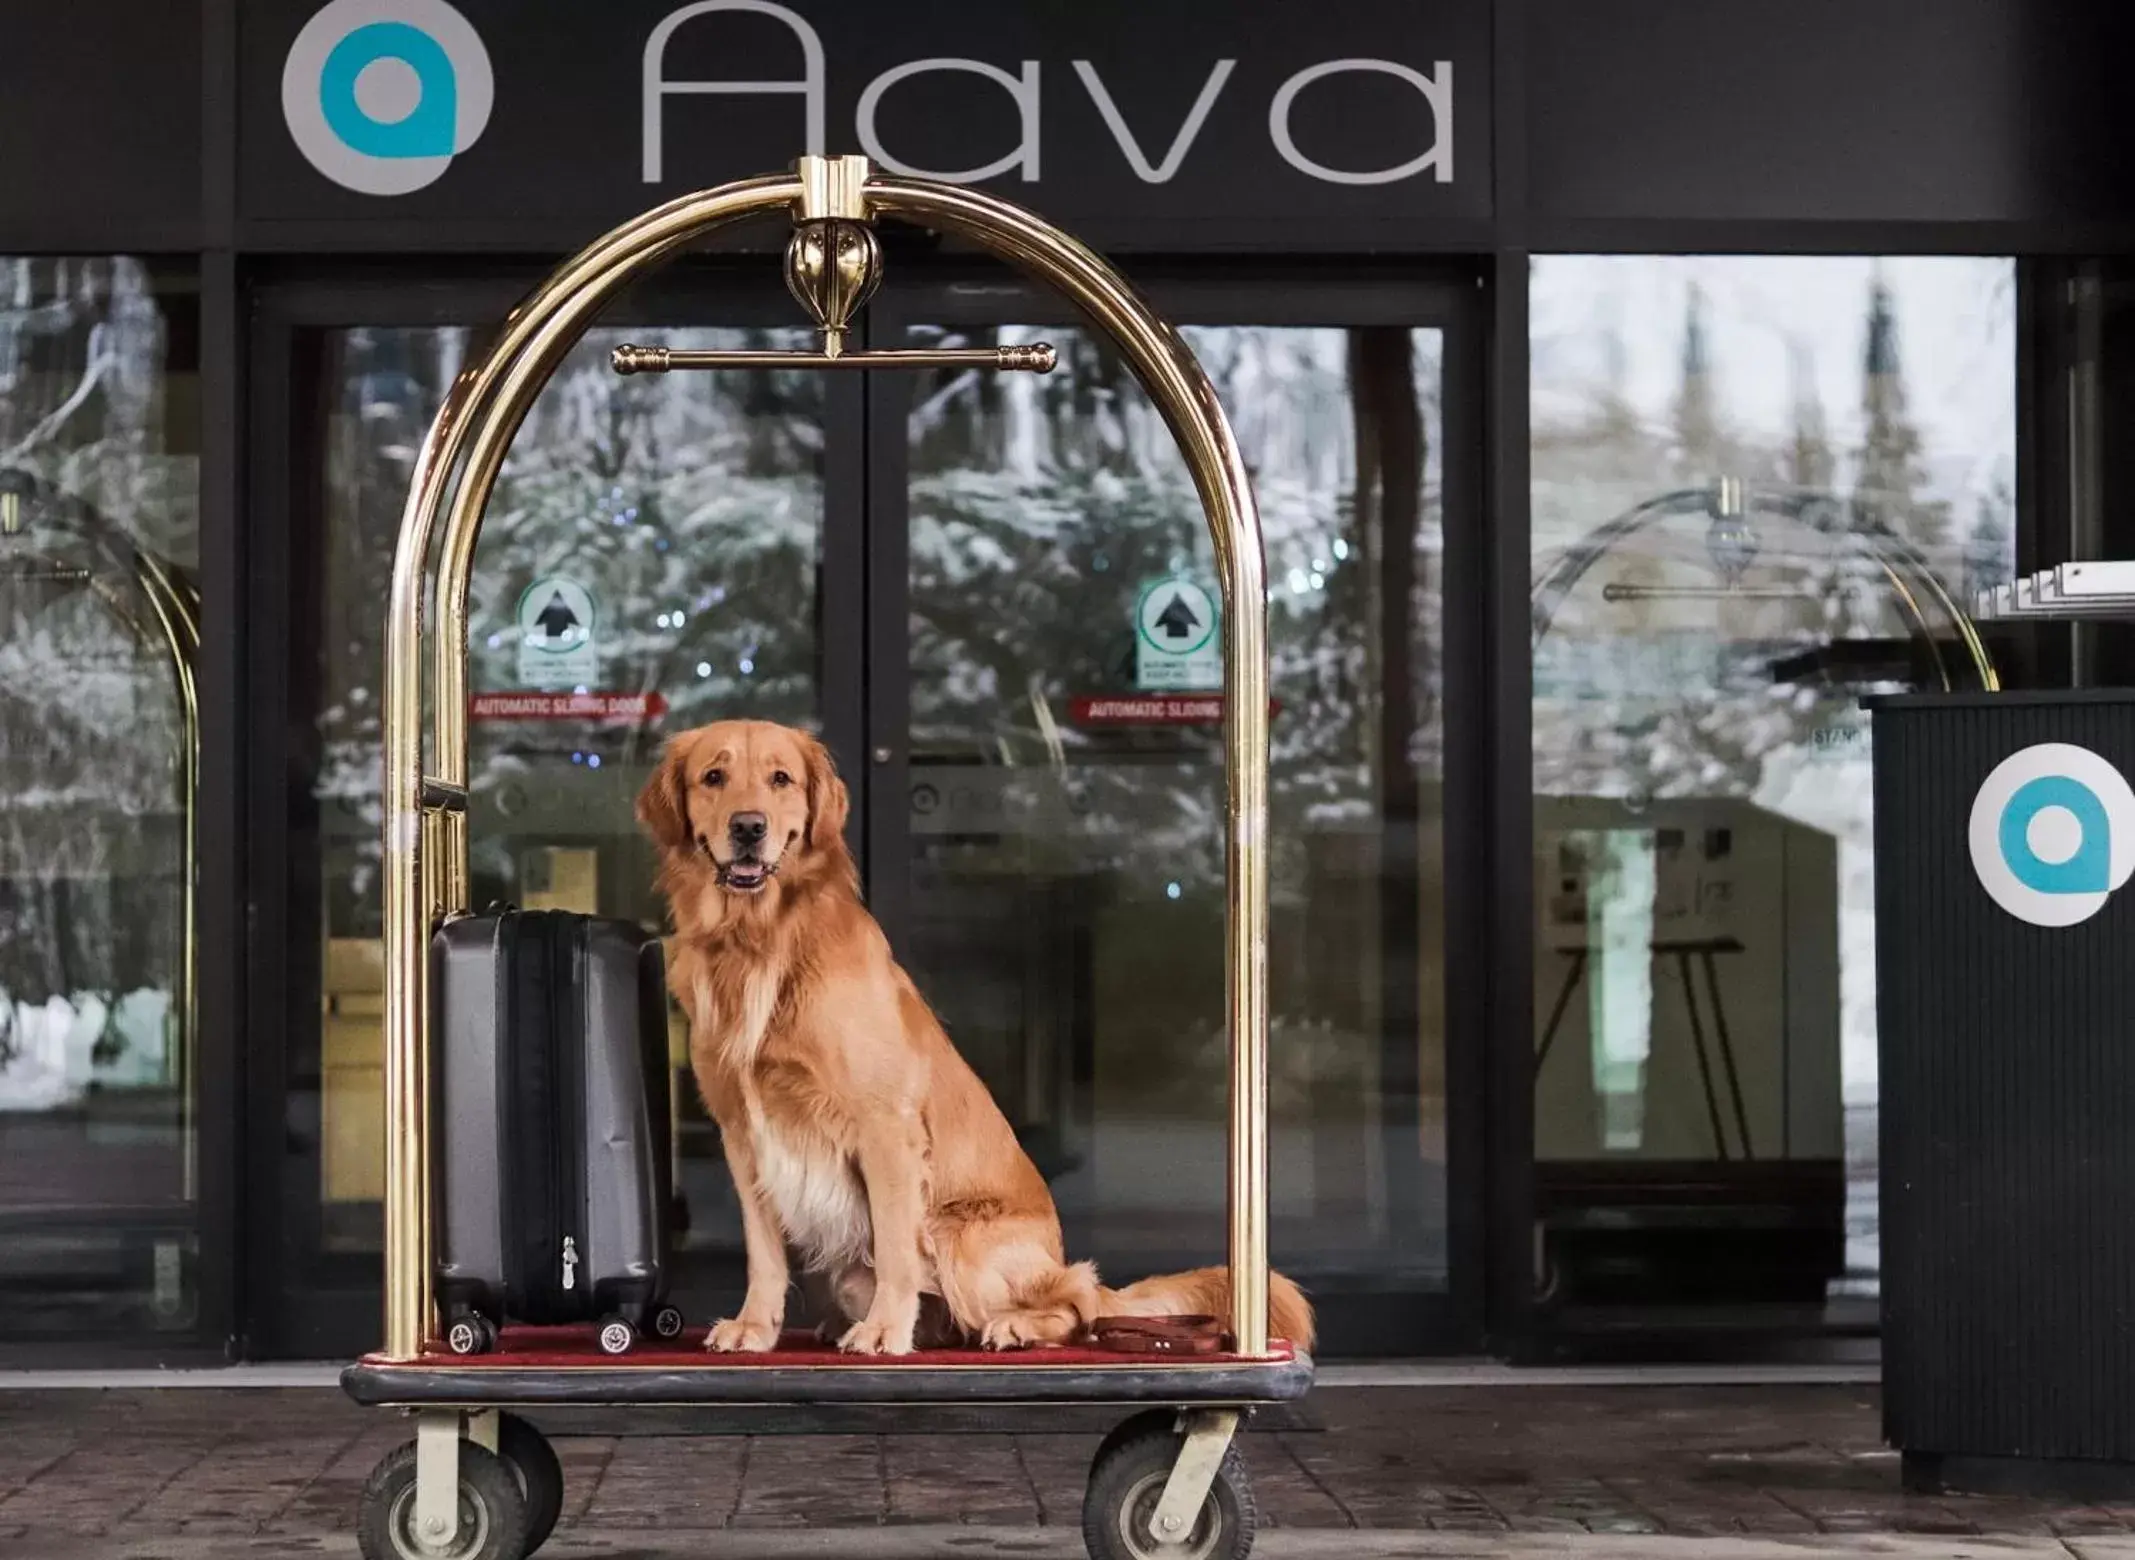 Pets in Aava Whistler Hotel